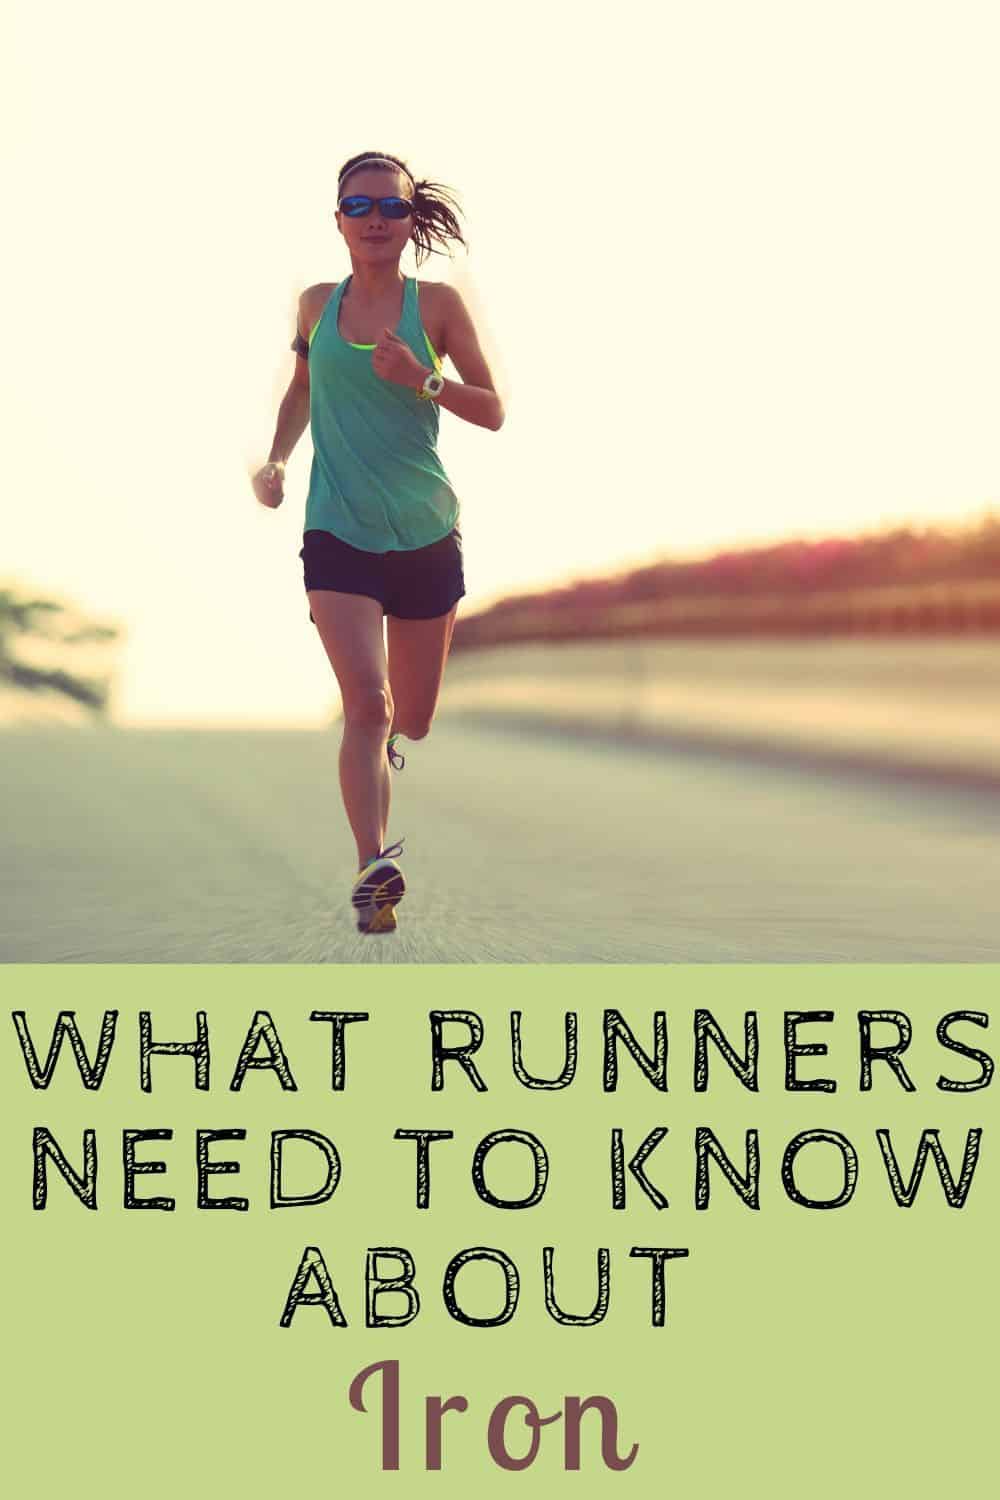 III. Common Types of Supplements Recommended for Runners